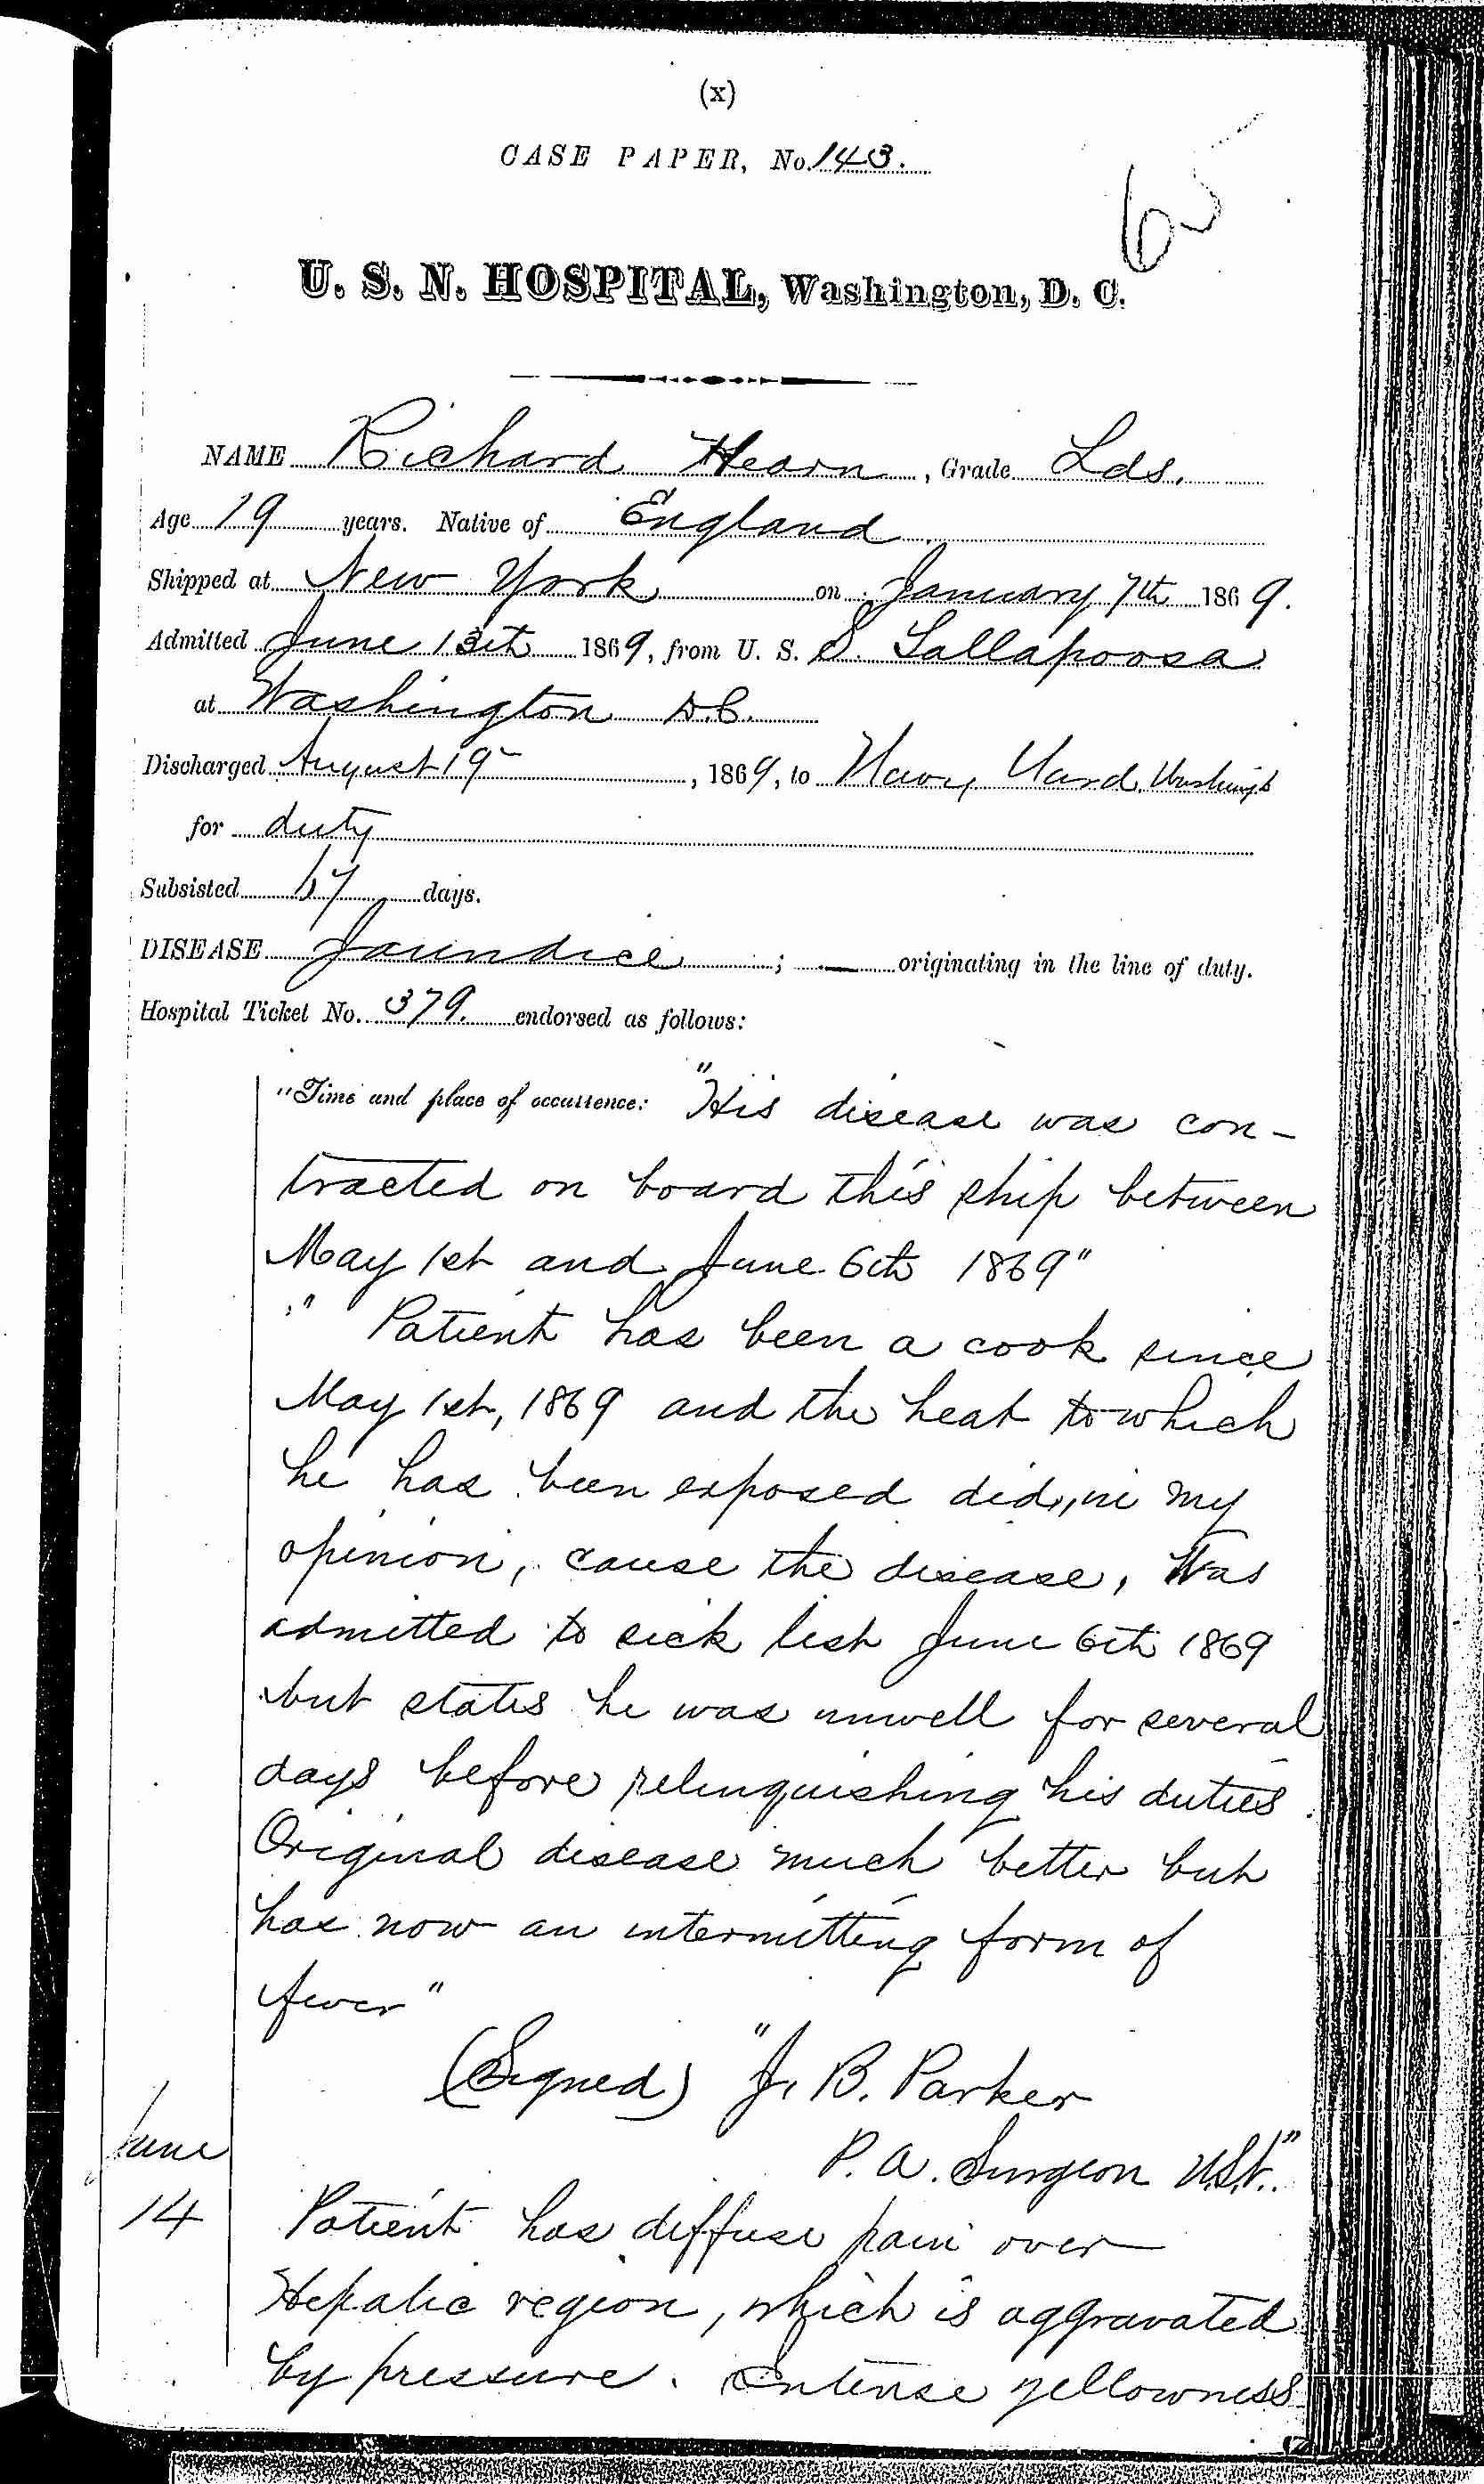 Entry for Richard Hearn (page 1 of 7) in the log Hospital Tickets and Case Papers - Naval Hospital - Washington, D.C. - 1868-69